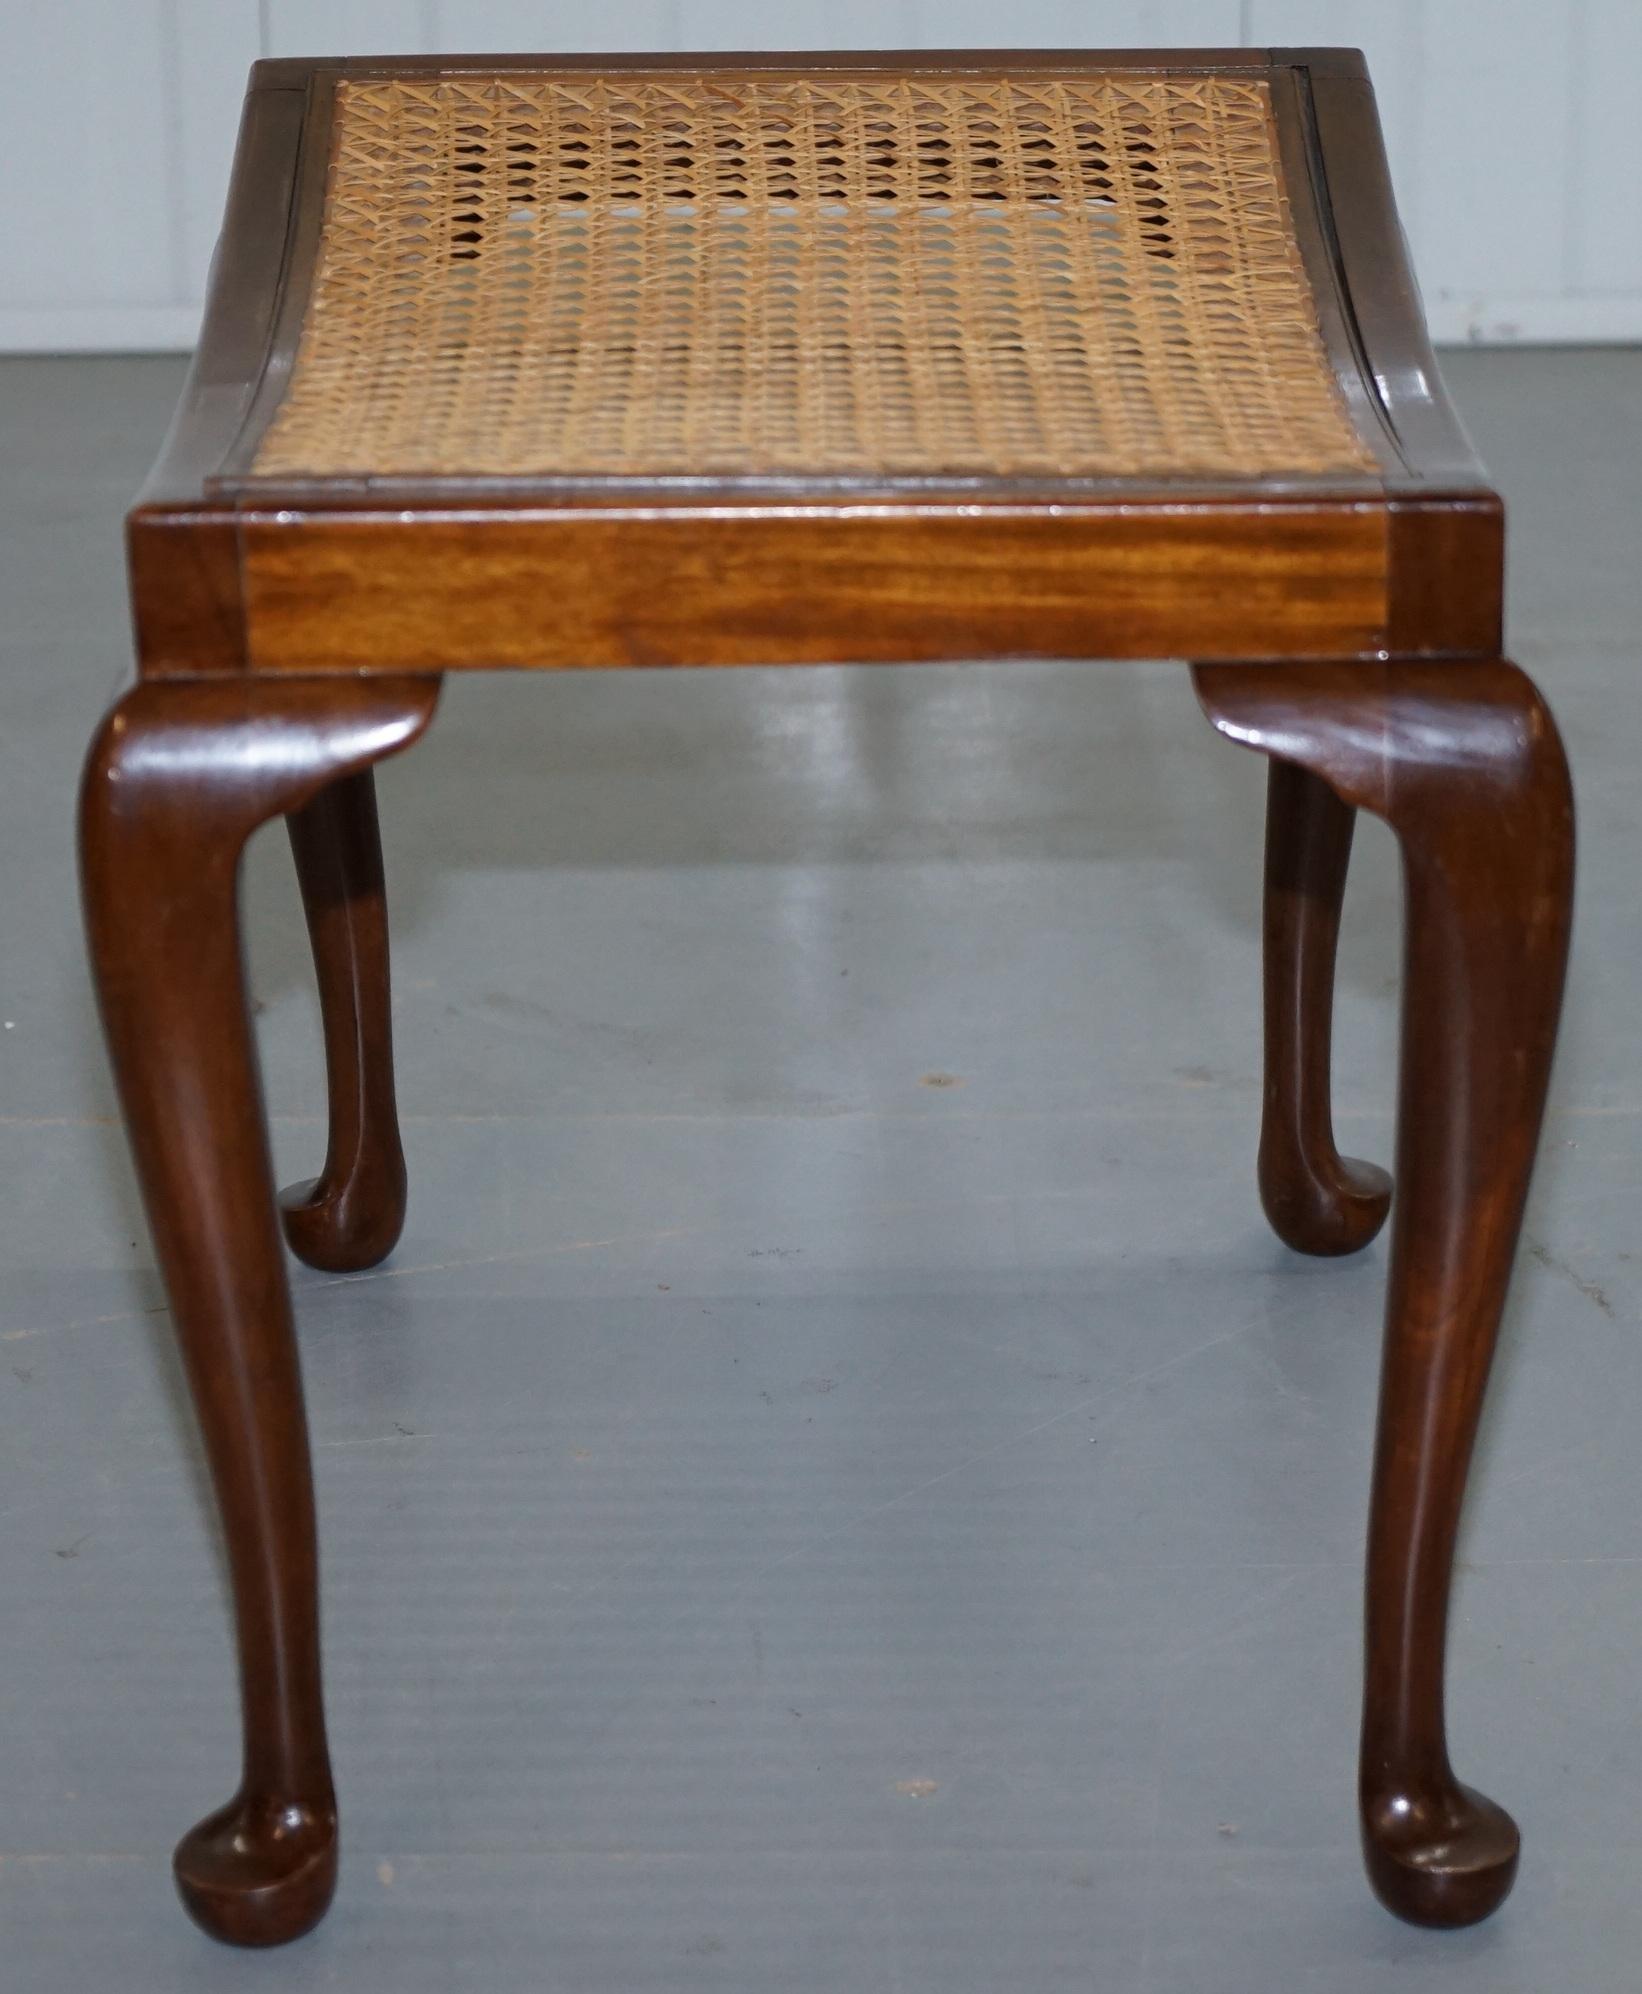 English Lovely Vintage circa 1940s Rattan Berger Bench Stool Seat with Cabriolet Legs